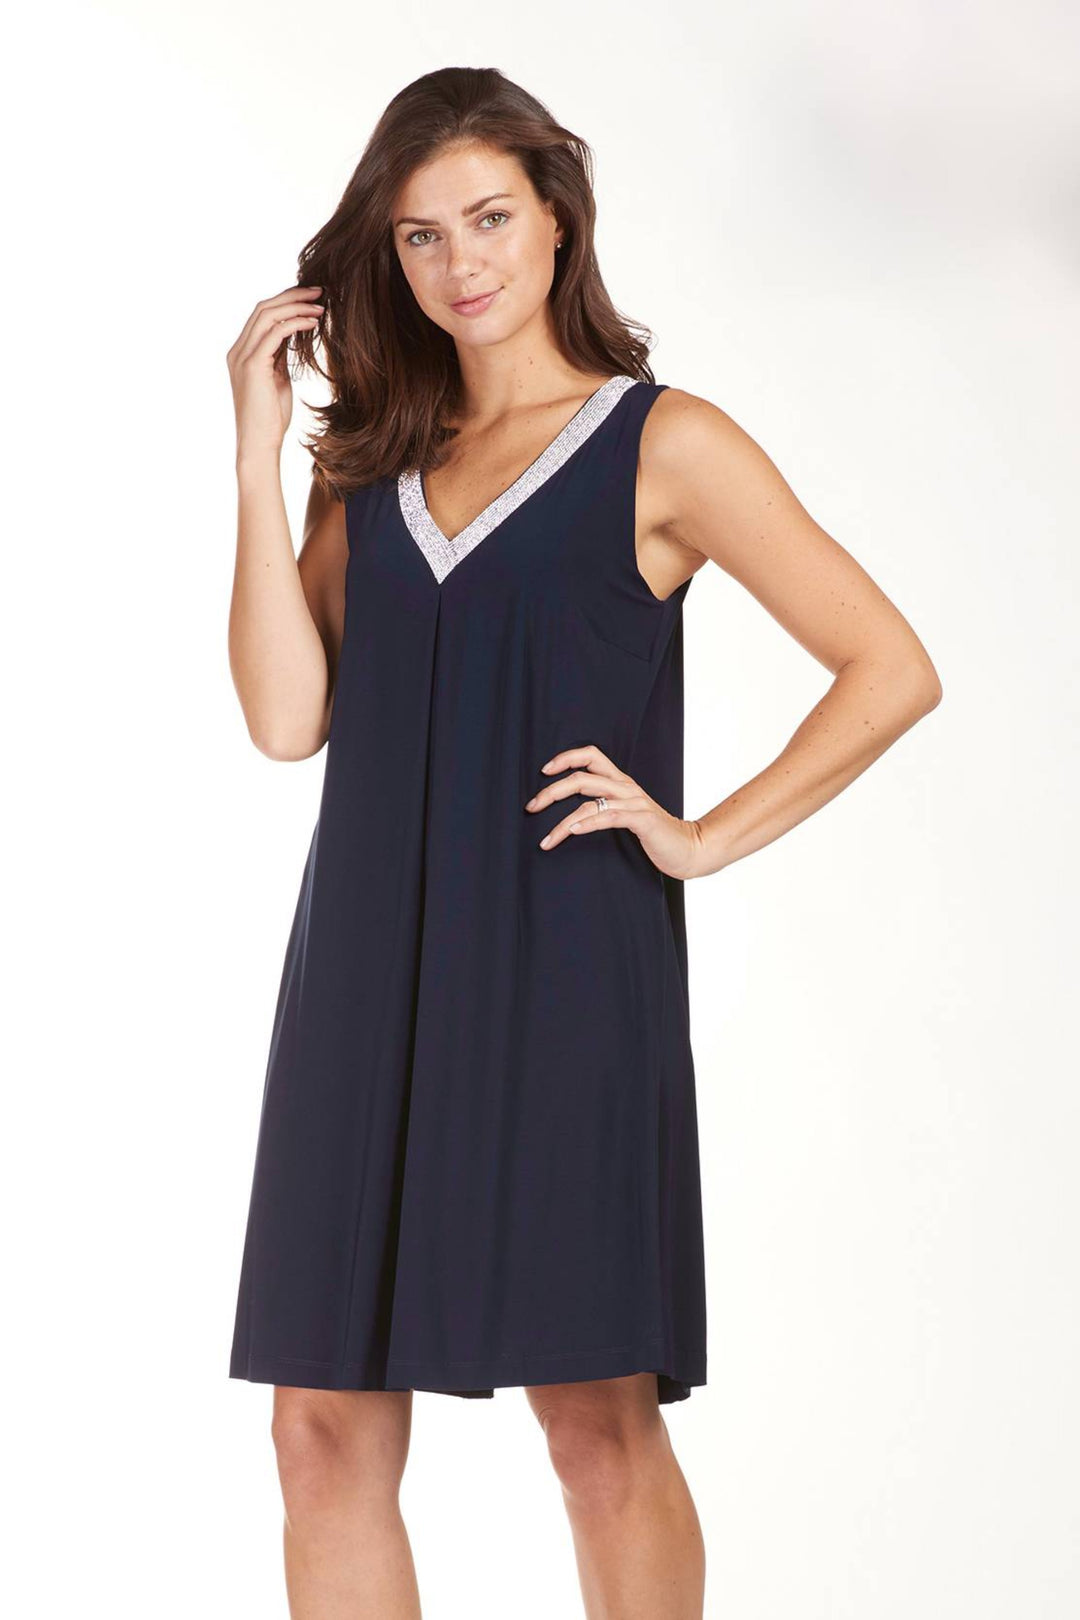 Frank Lyman Fall 2024 Adorned with diamond-like stones, the v-neck adds a touch of elegance to this sleeveless, fully lined lightweight cocktail dress. The flared style hem cut make it the perfect choice for a late afternoon out for drinks in an elegant setting. 